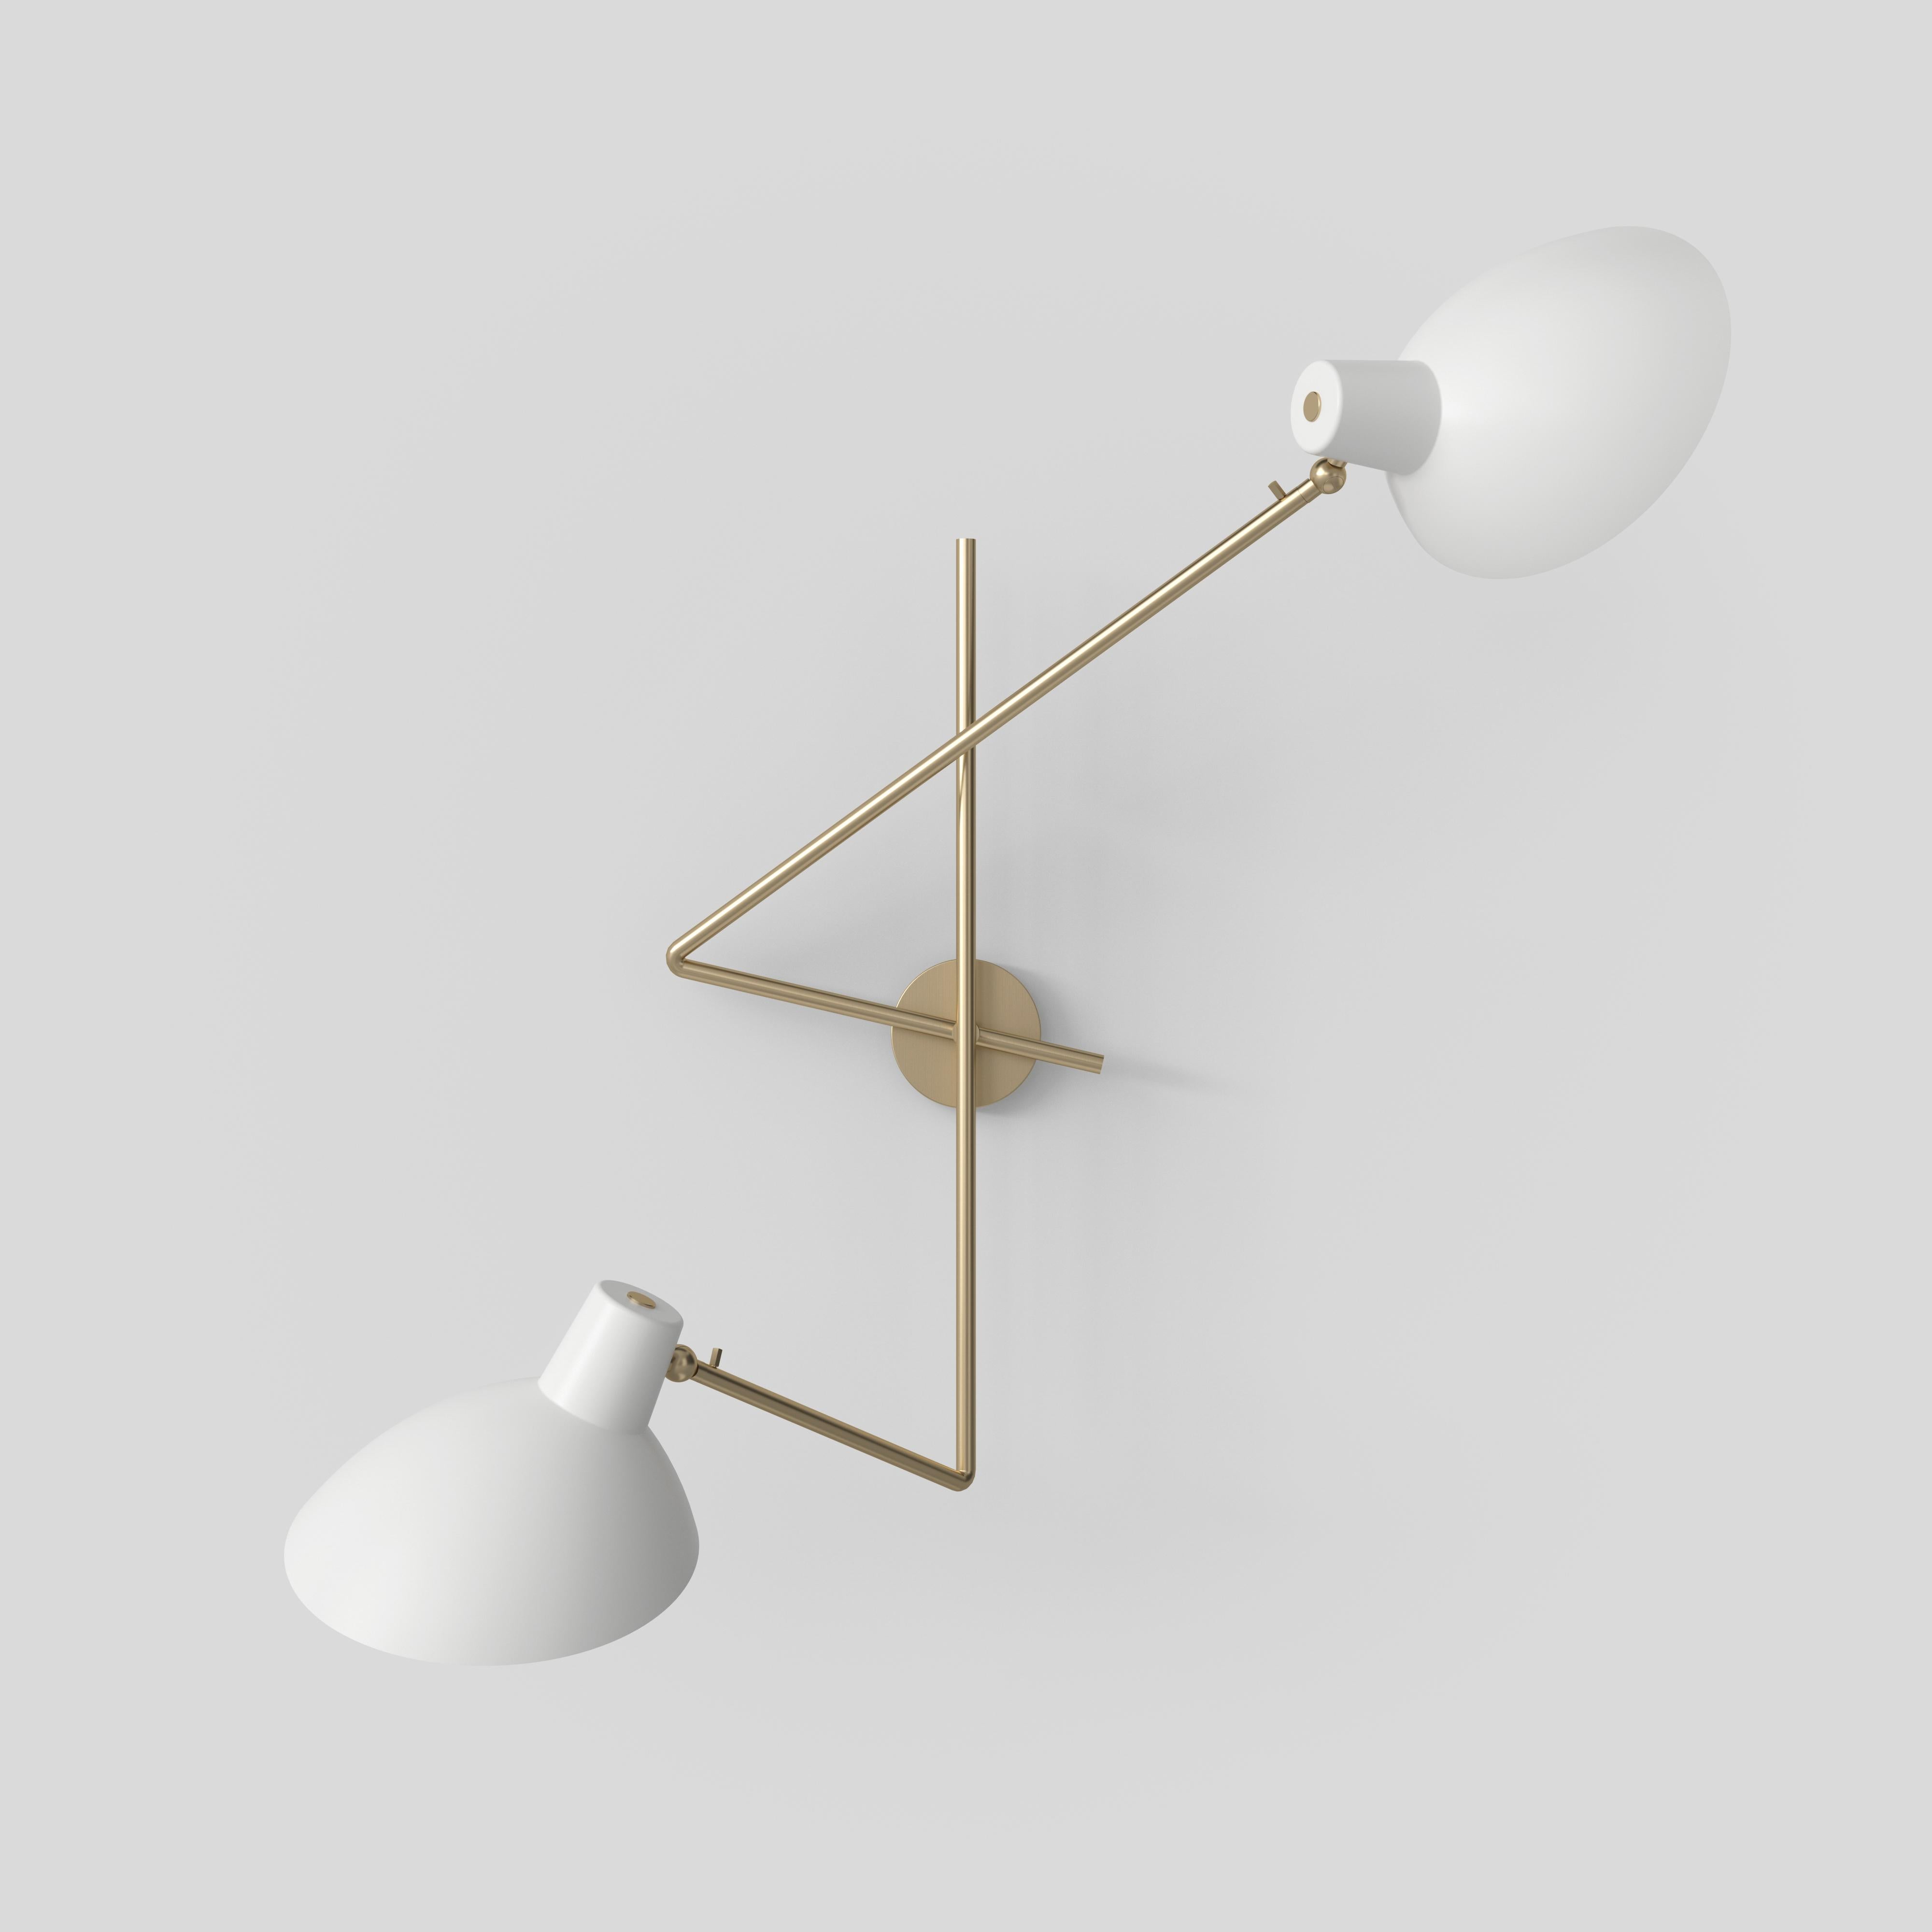 VV Cinquanta twin wall lamp
Design by Vittoriano Viganò
This version is with black lacquered reflector and brass mount.

The VV Cinquanta features an elegant and versatile posable direct light source that can swivel and tilt. The Twin model is